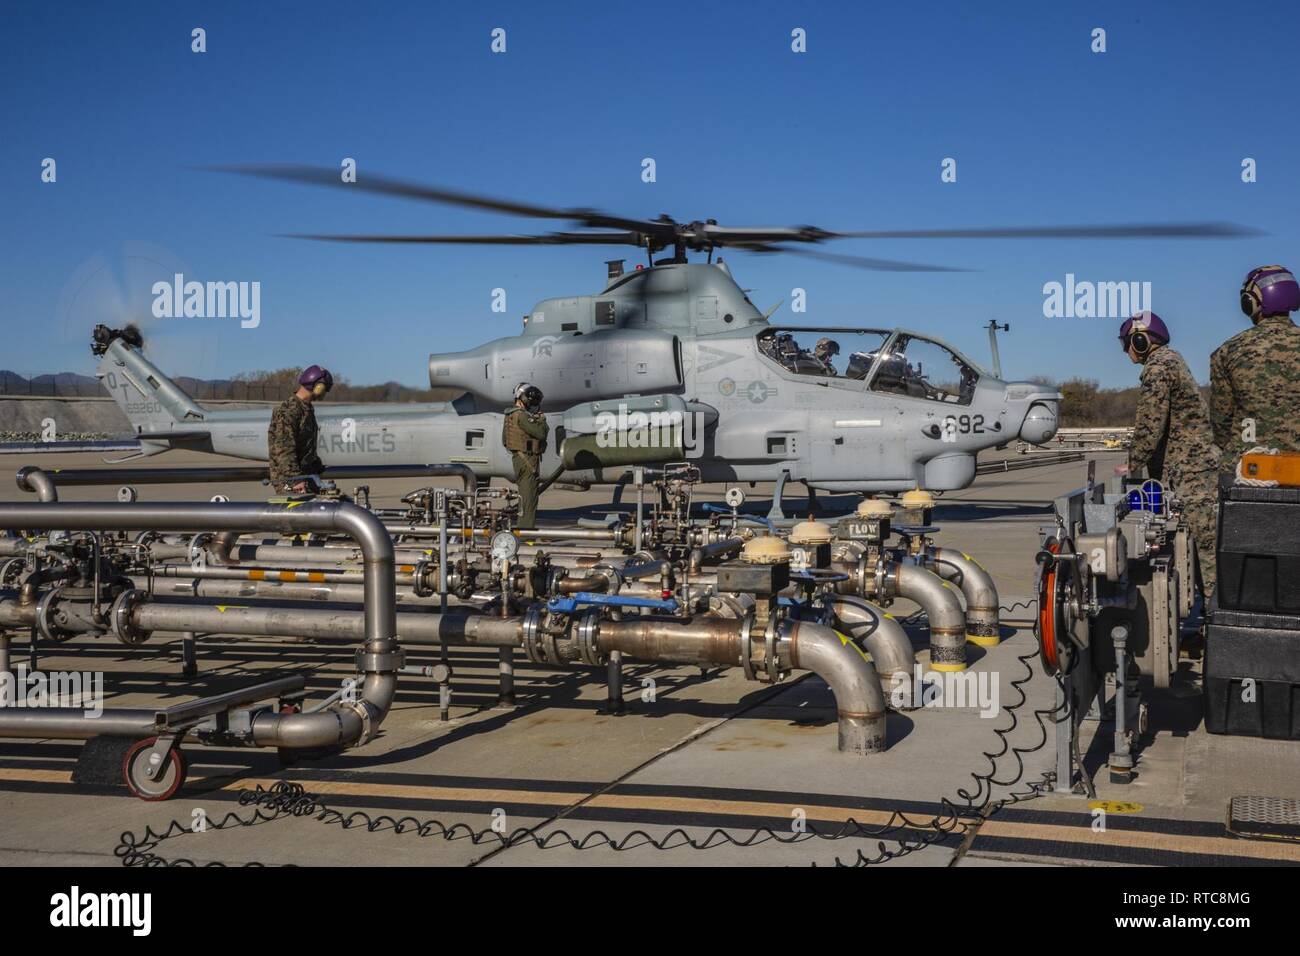 U.S. Marines with Headquarters & Headquarters Squadron, Marine Corps Air Station Camp Pendleton, refuel an AH-1Z Viper helicopter at Marine Corps Air Station (MCAS) Camp Pendleton, California, Feb. 11, 2019. MCAS Camp Pendleton Bulk Fuel Specialists receive, store and dispense fuel to aircraft supported by the air station. Stock Photo